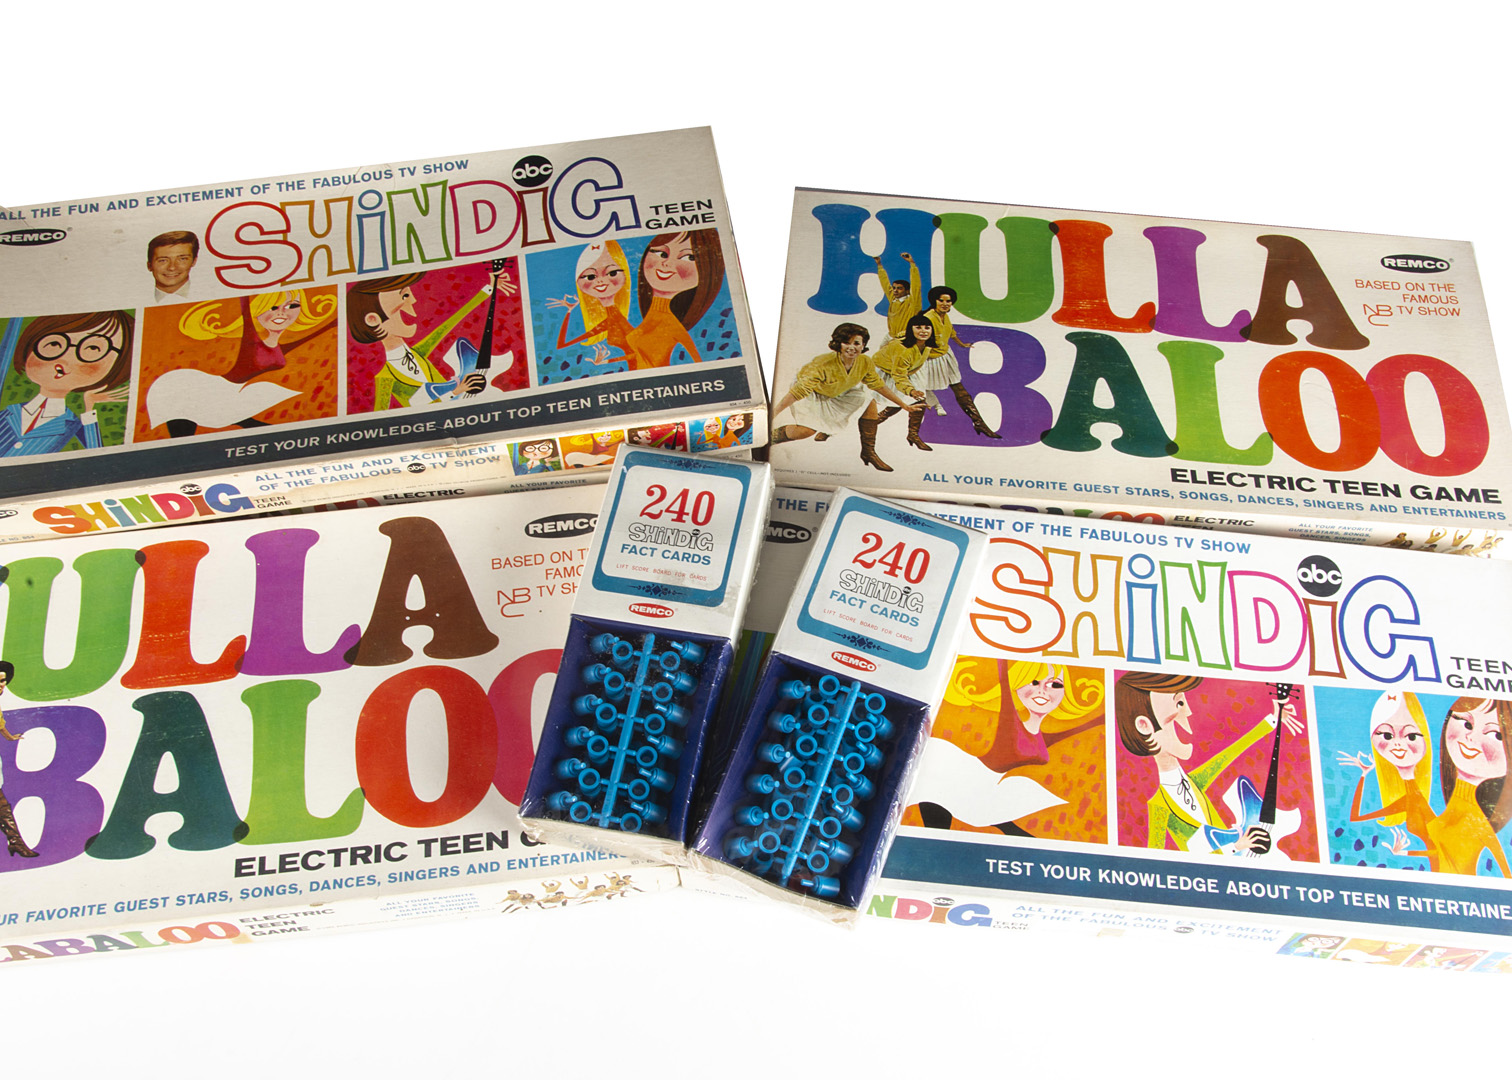 Hullaballo / Shindig Games, five boxed games of Hullabaloo, the electric Teen game together with